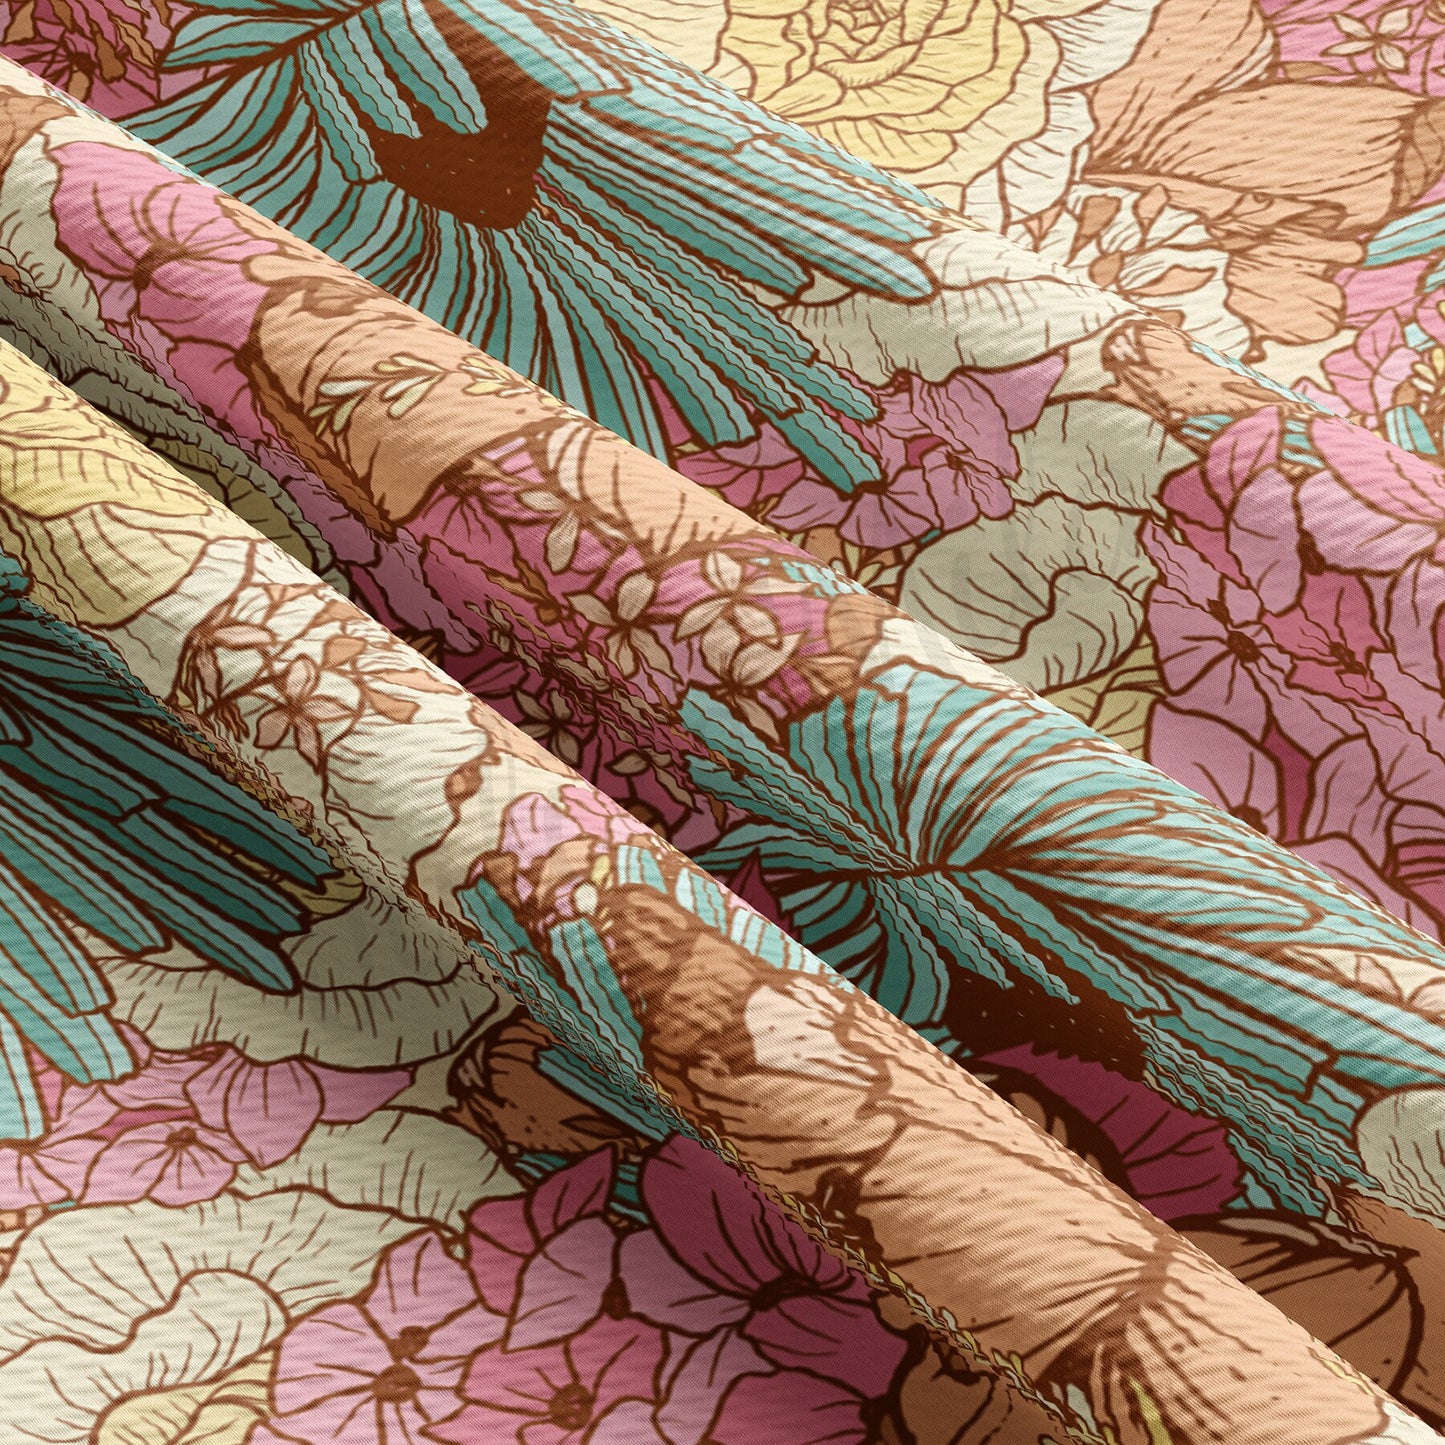 Floral  Bullet Textured Fabric by the yard AA1578